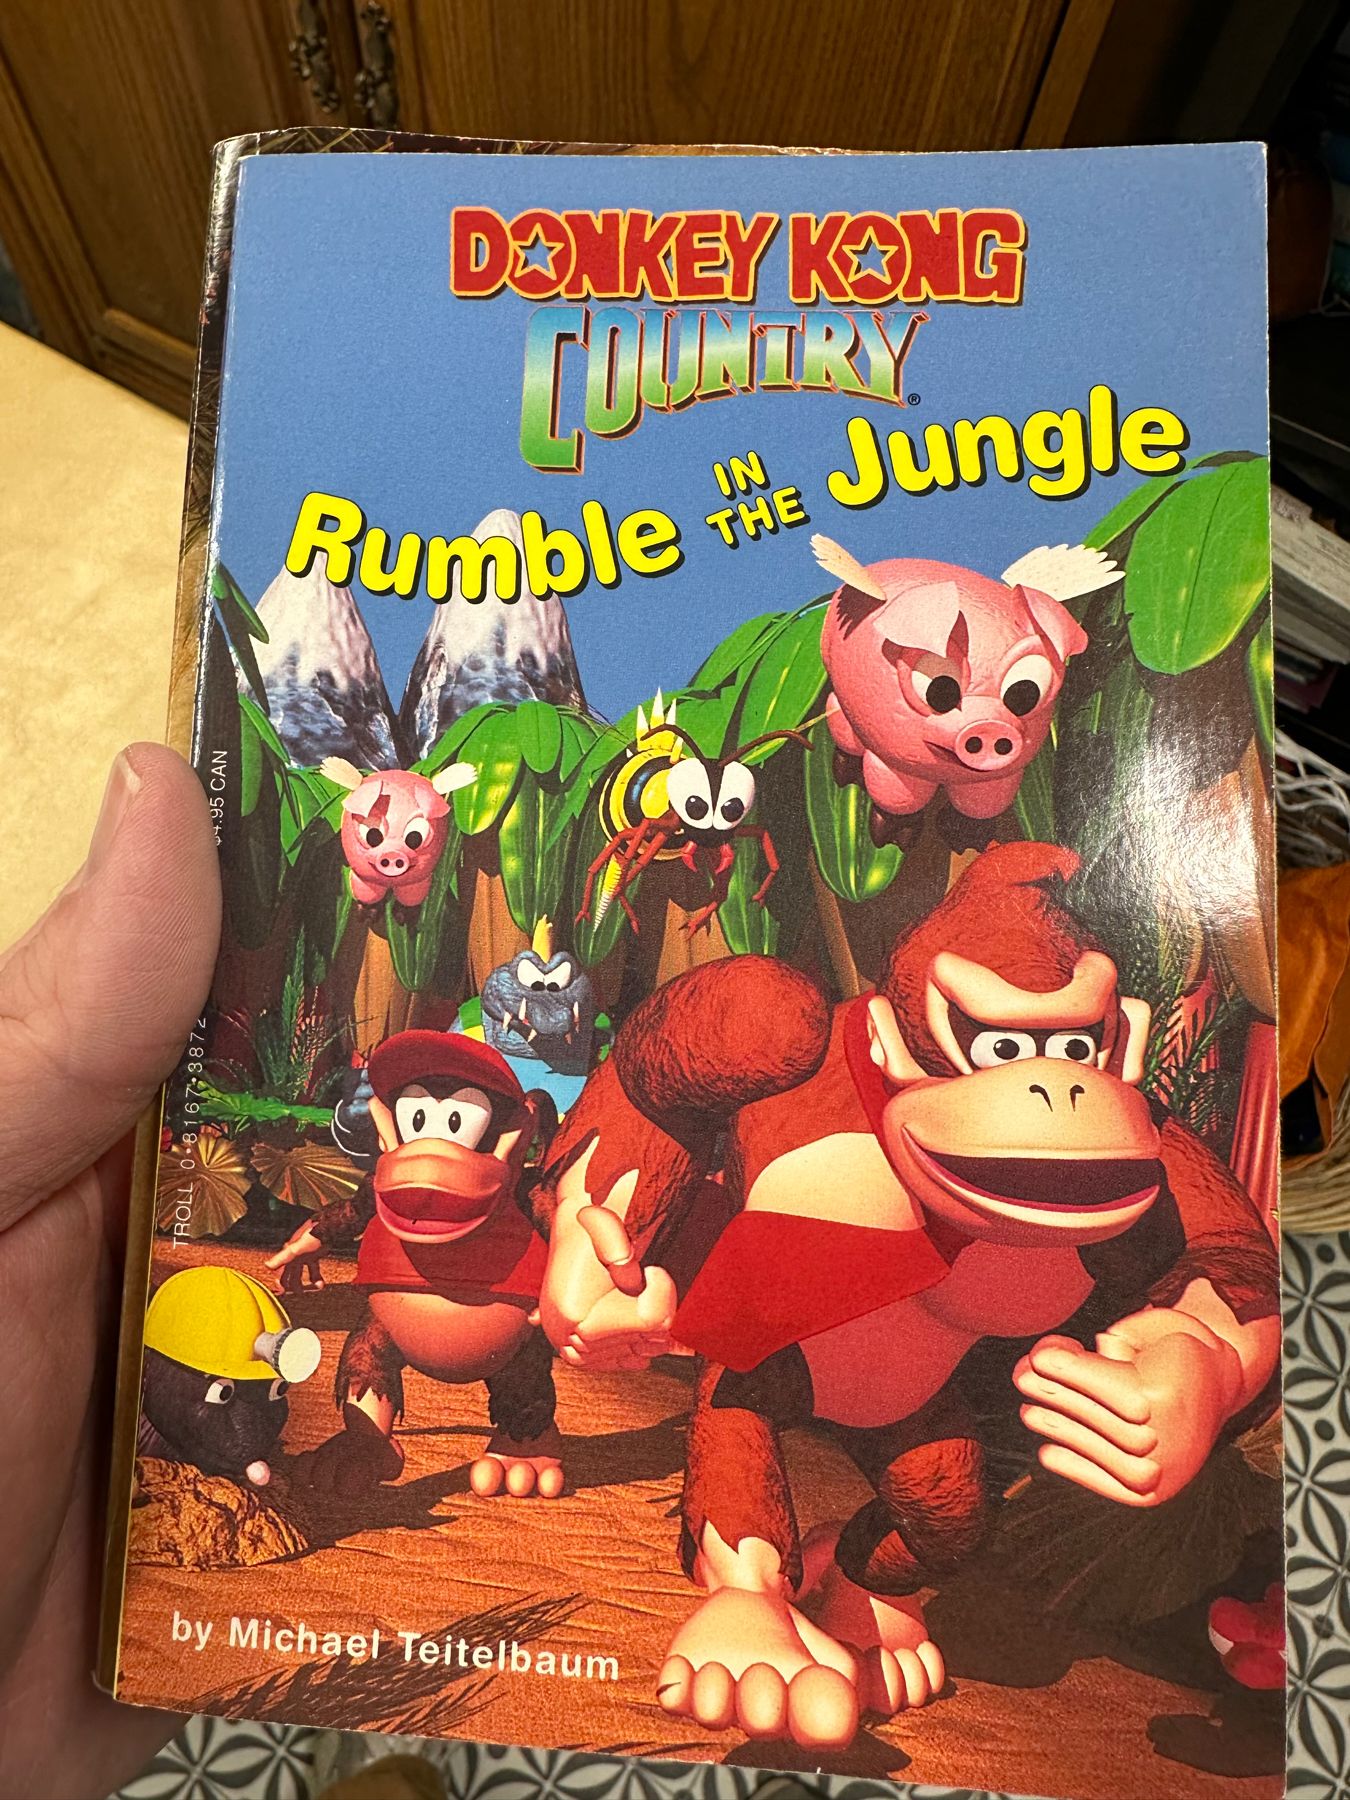 A book cover for “Donkey Kong Country: Rumble in the Jungle” featuring various characters from the Donkey Kong series, including Donkey Kong and Diddy Kong, against a jungle backdrop.